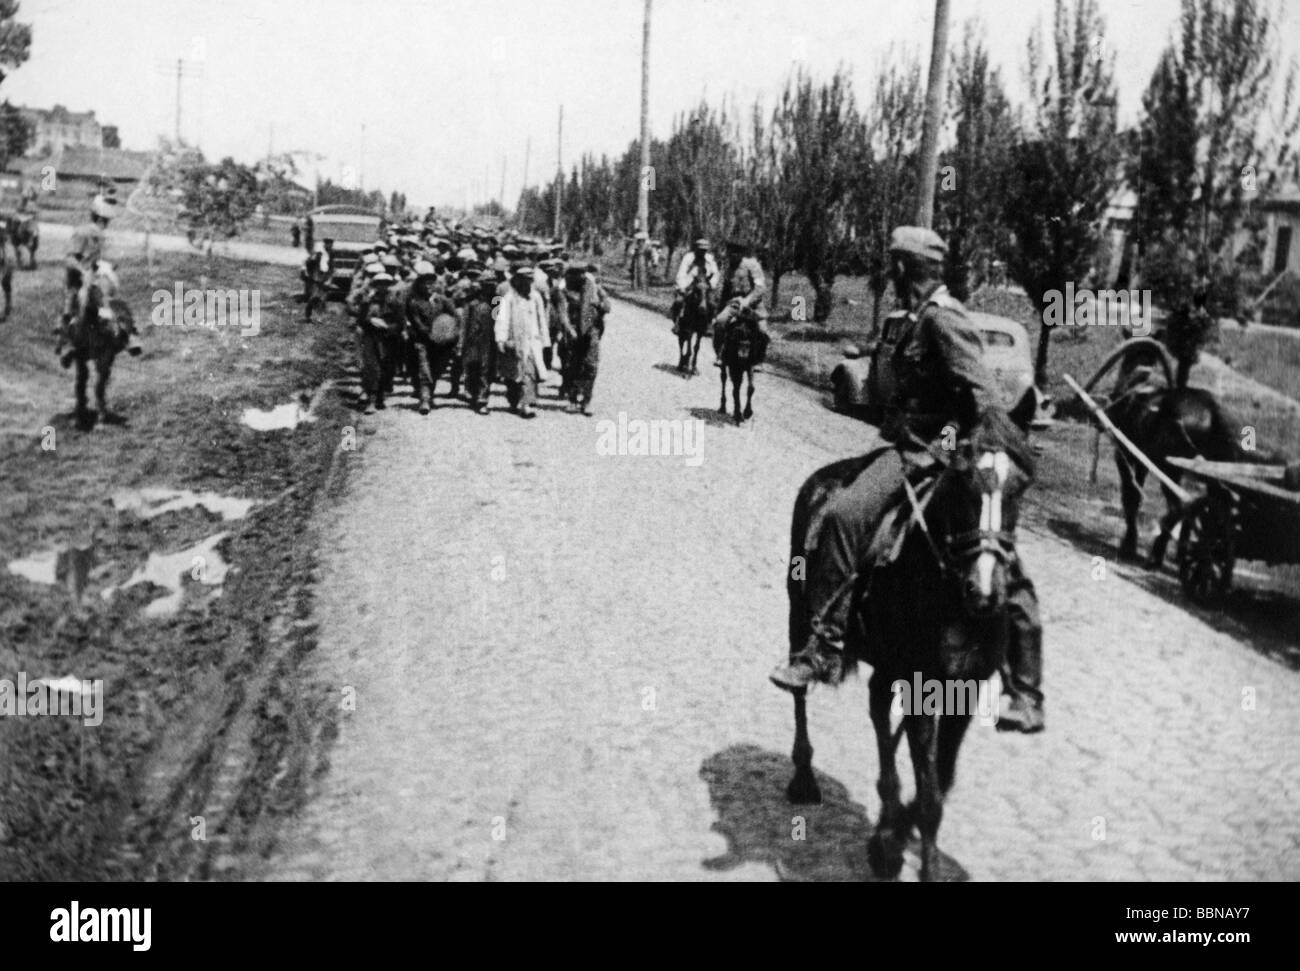 events, Second World War / WWII, Russia 1942 / 1943, partisan warfare, captured Soviet partisans are being marched to Poltava, circa 1942, Stock Photo